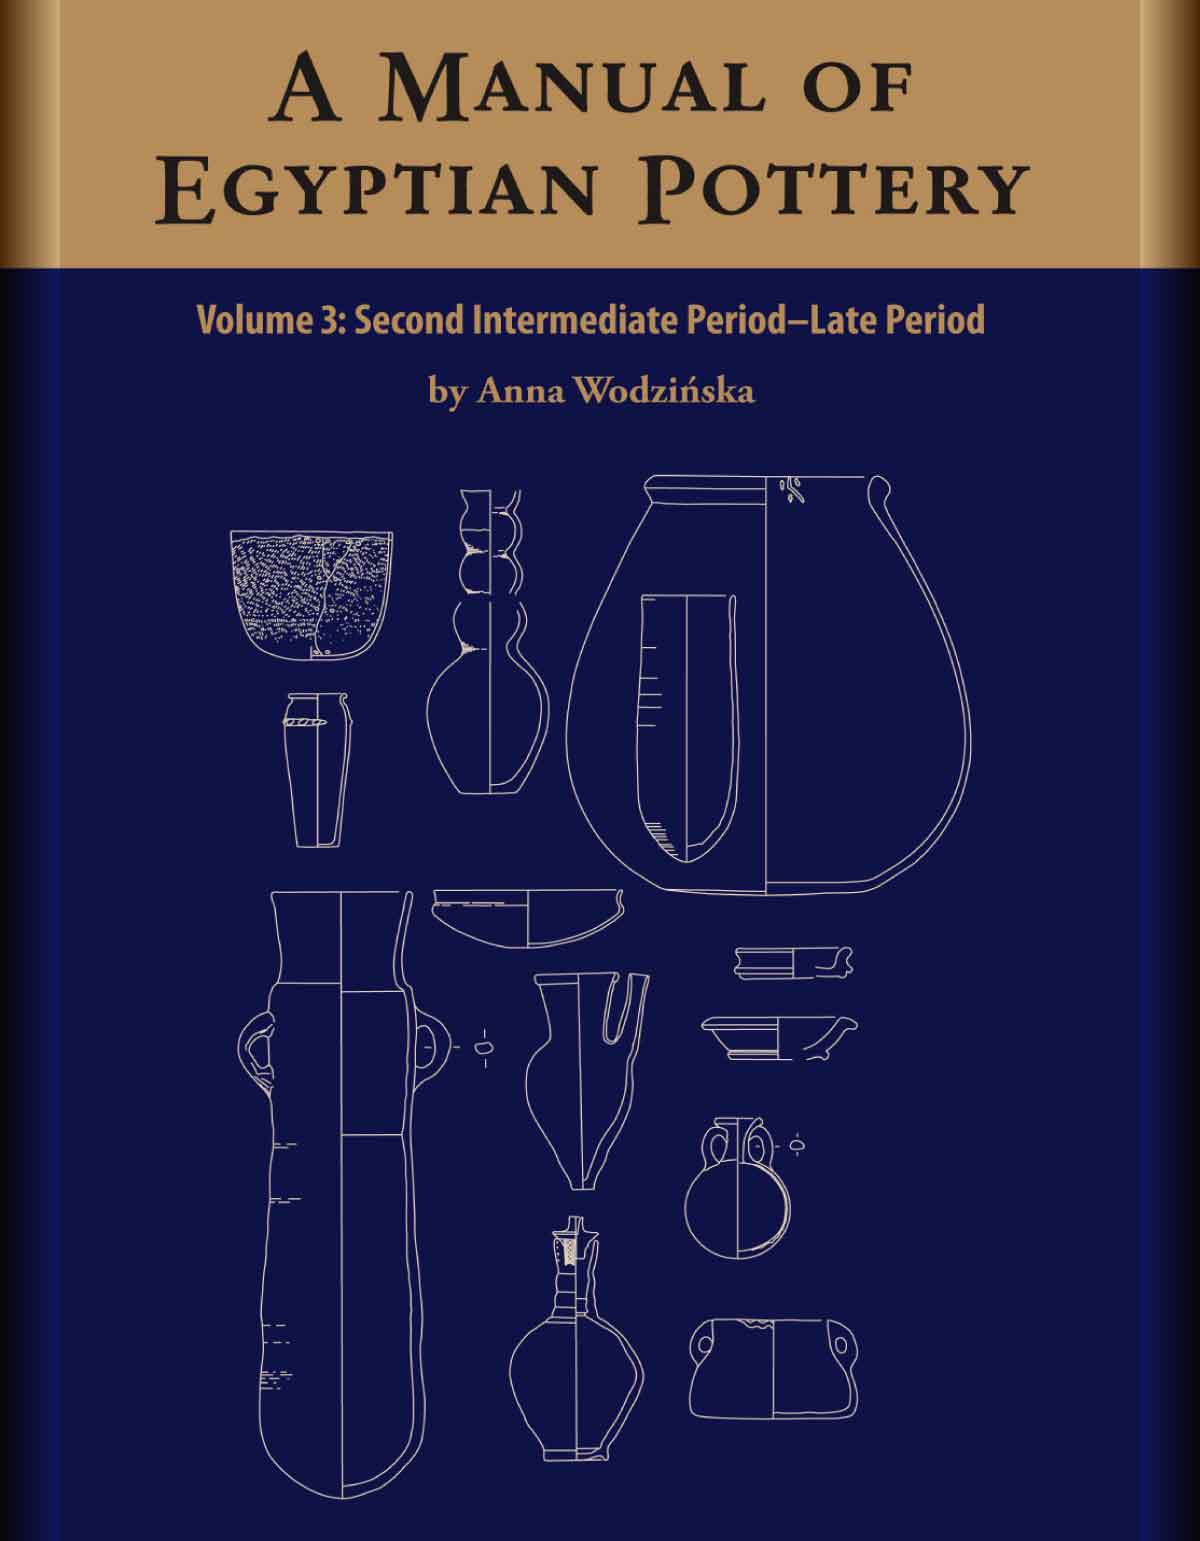 A-Manual-of-Egyptian-Pottery-vol-3-cover